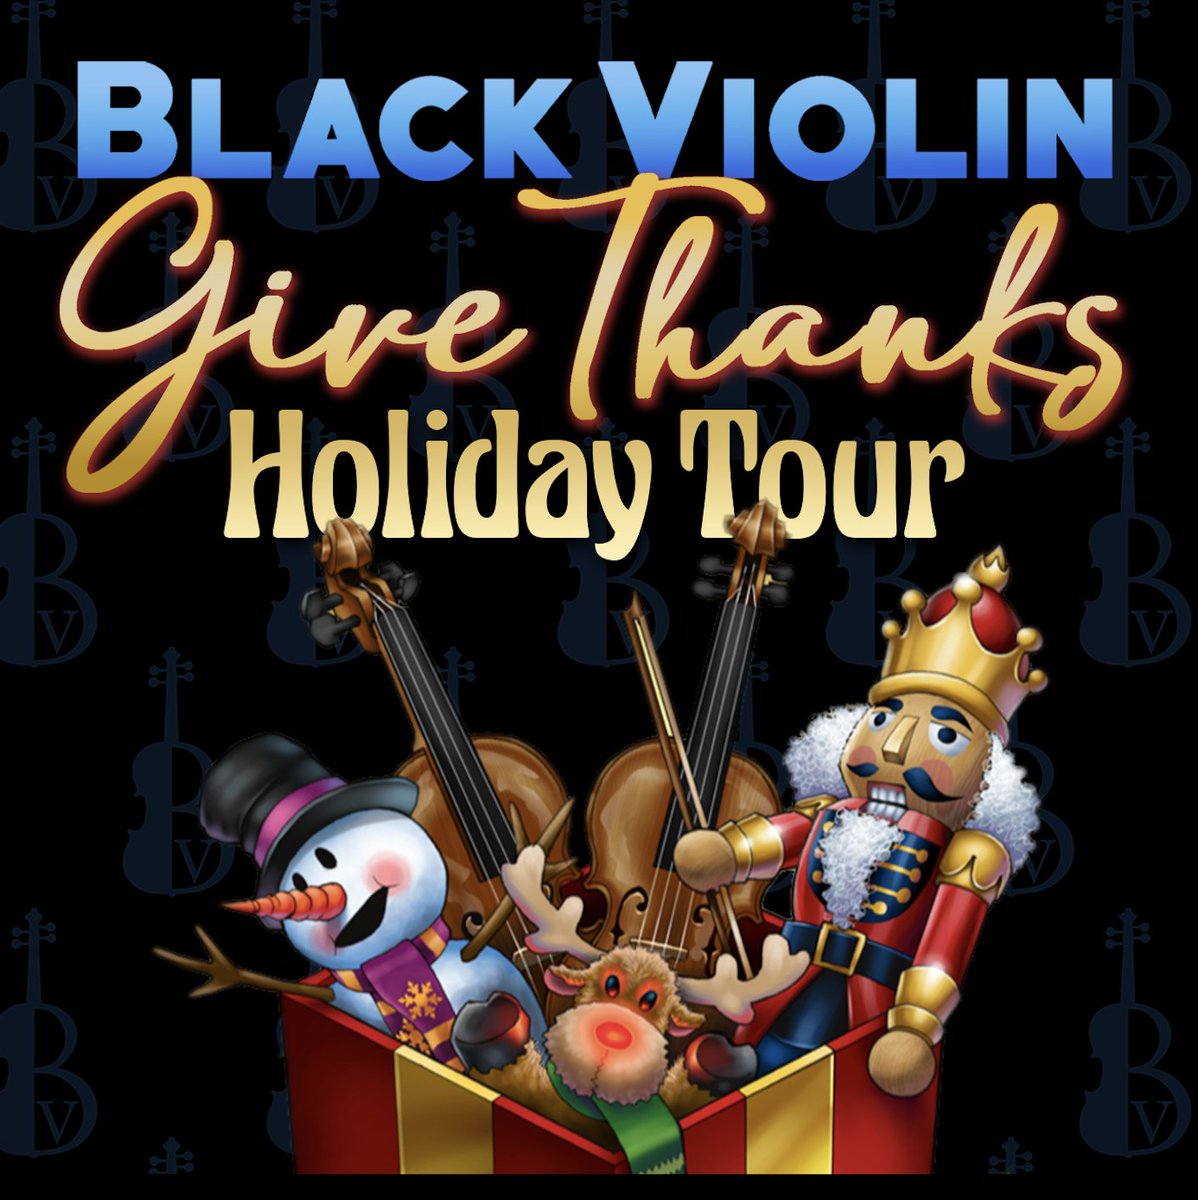 Join us this winter on our Give Thanks Tour 2022! We'll be bringing the spirit of the season to a city near you starting this November! Click the link in our bio for tickets, new shows added frequently. #GiveThanks #TaketheStairs #BlackViolin #holidaytour